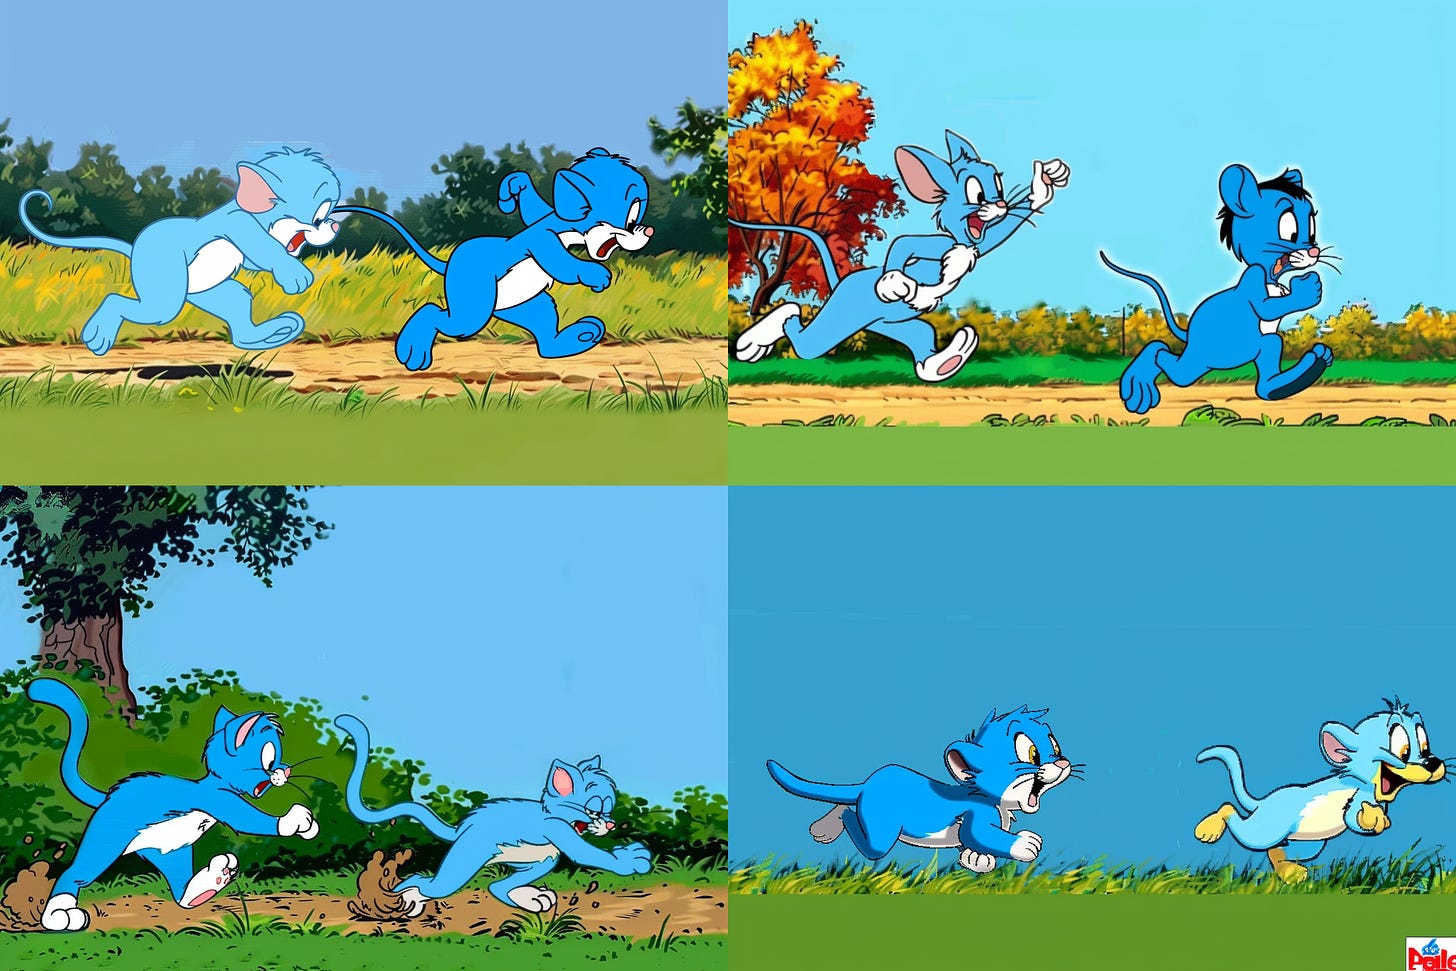 tom and jerry cartoon image generated by midjourney